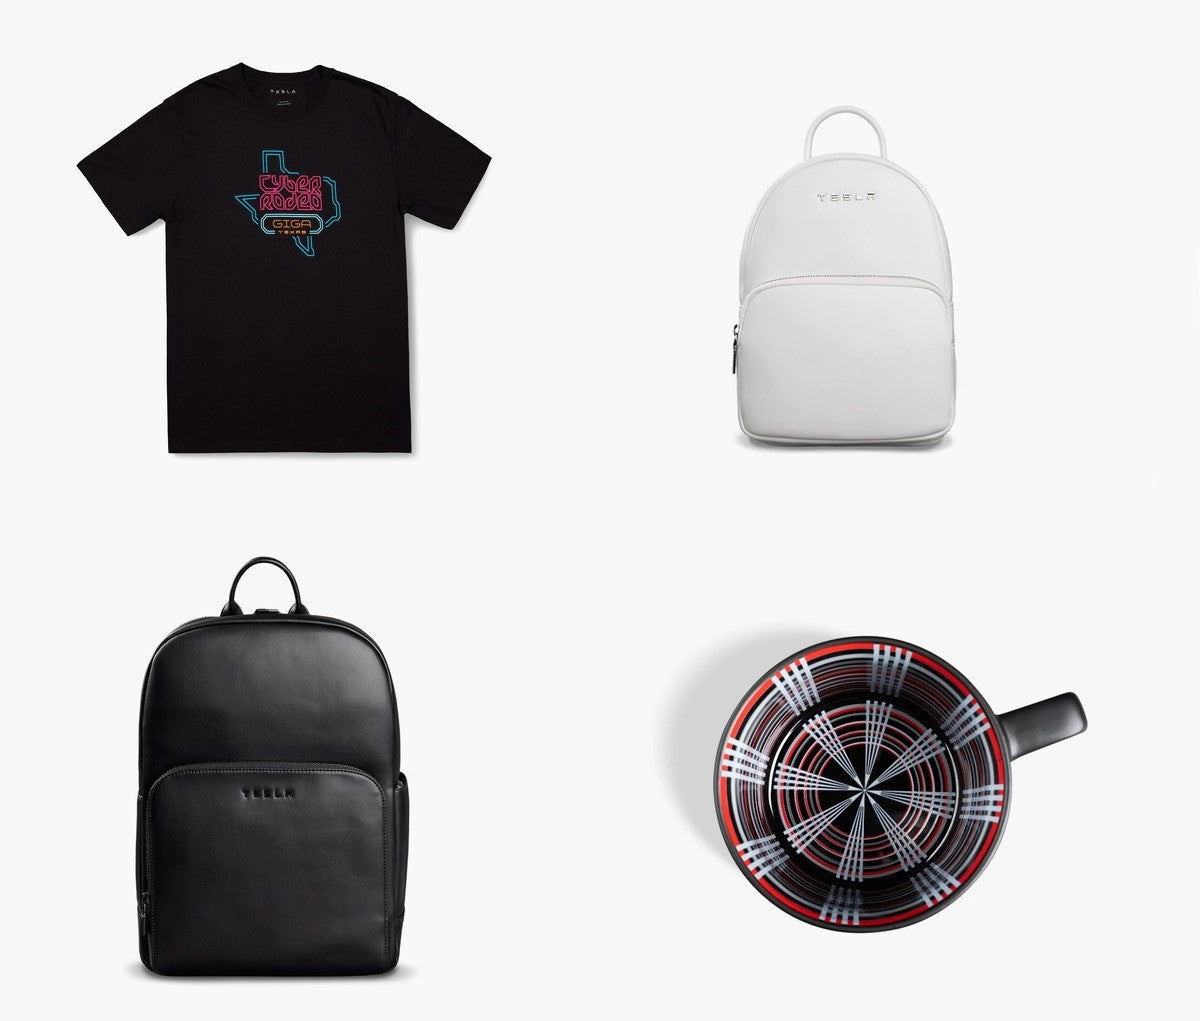 Tesla Adds Cool Merch to Shop Related to Cyber Rodeo, Plaid & More